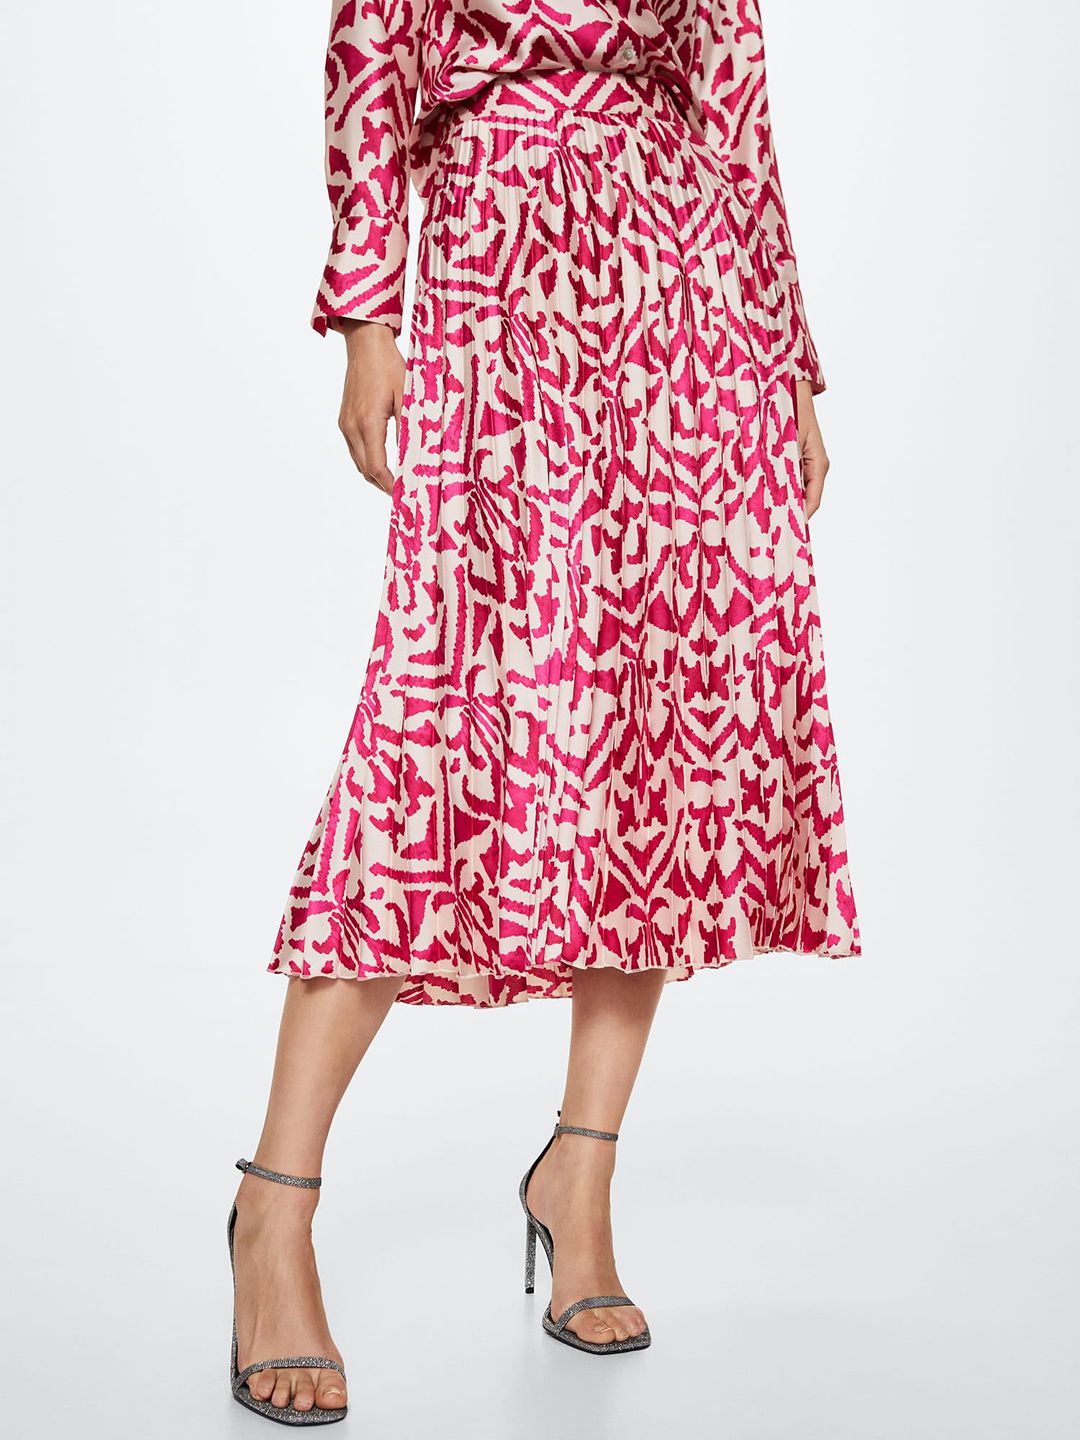 MANGO Women Pink & Cream-Coloured Accordian Pleated Abstract Printed A-line Skirt Price in India